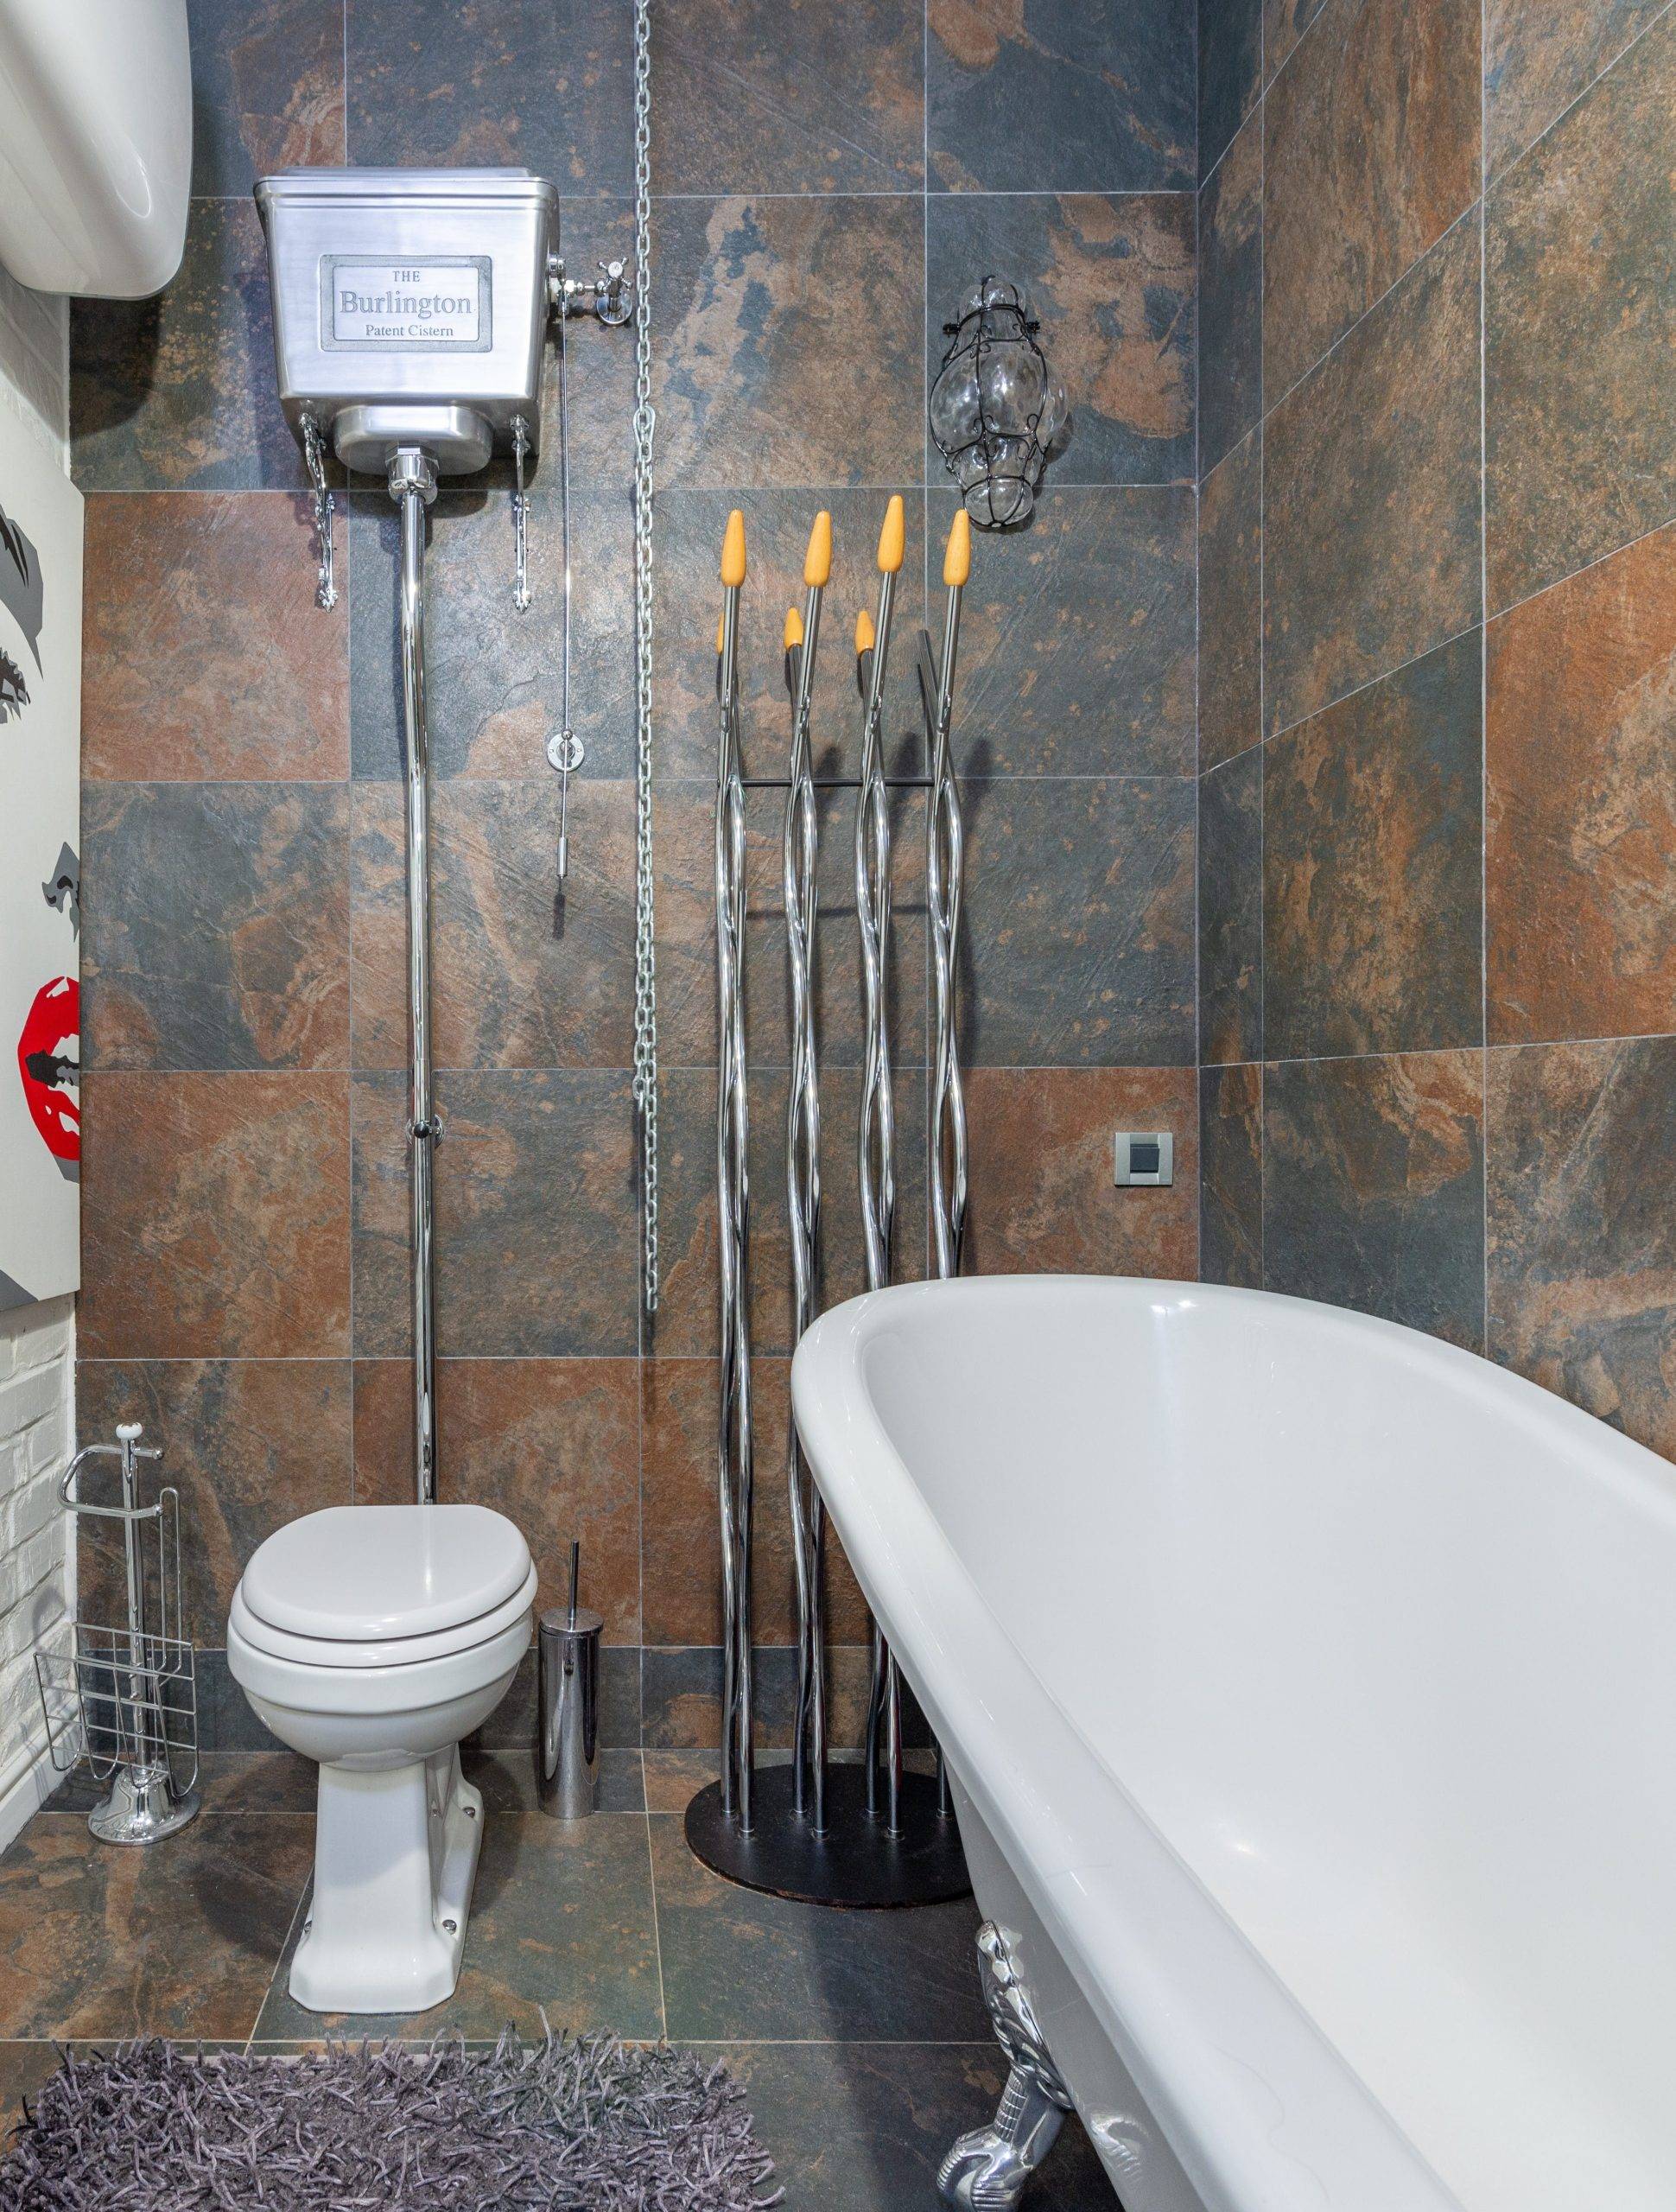 Around-the-Clock Plumbing Assistance: The Benefits of 24-Hour Plumbing Services